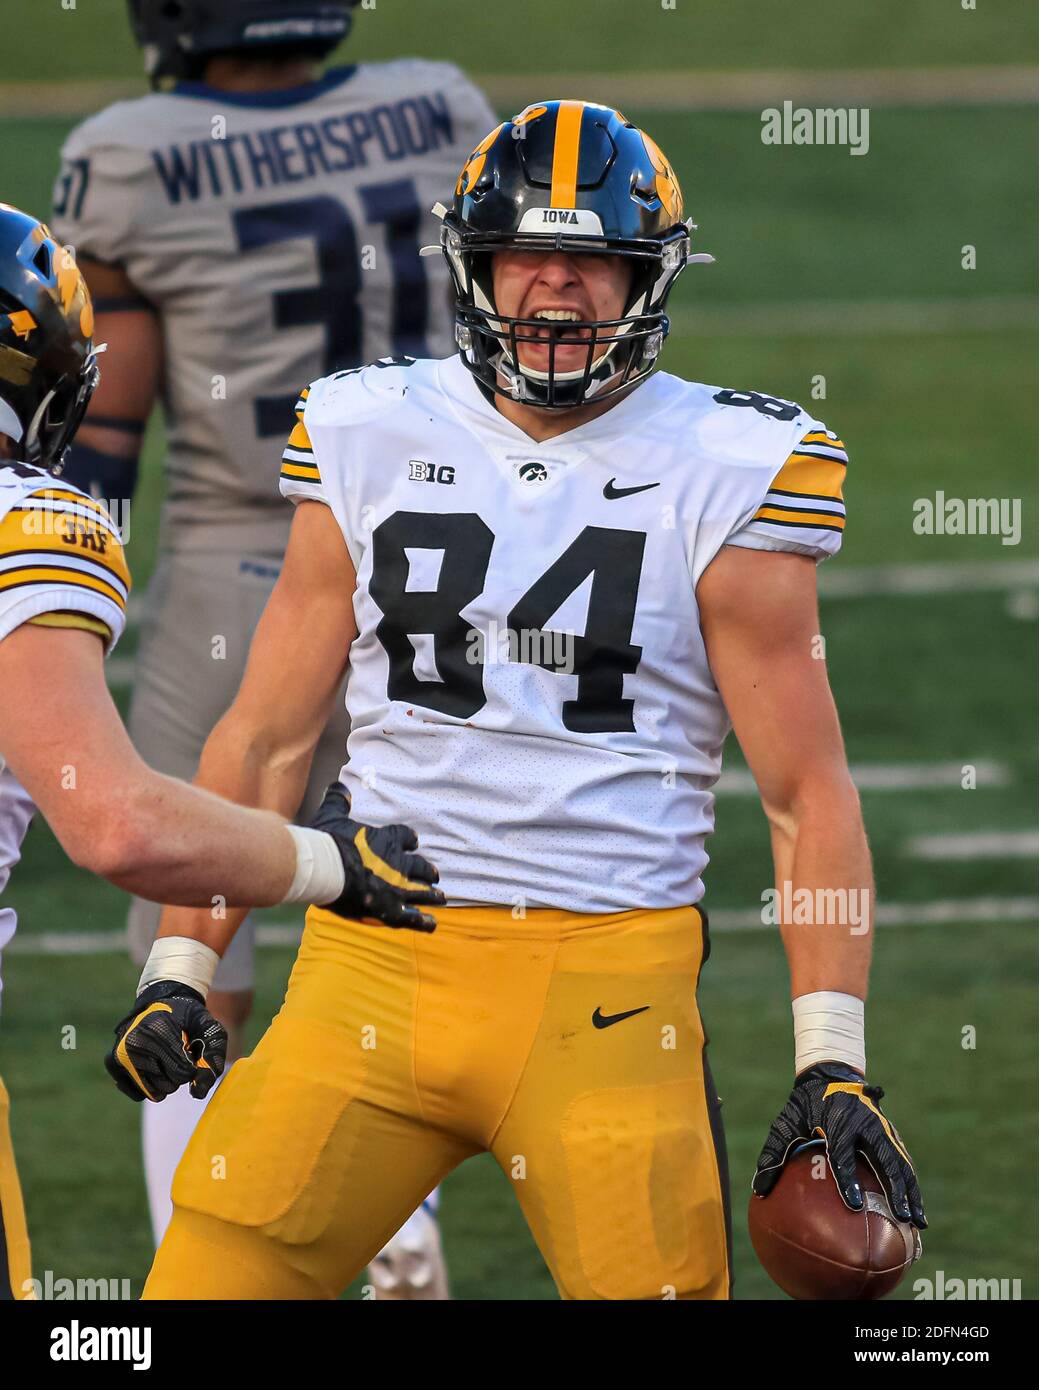 Saturday Dec 5th -Iowa Hawkeyes tight end Sam LaPorta (84) celebrates a touchdown dive into the endzone during NCAA football game action between the University of Illinois Fighting Illini vs the Iowa Hawkeyes at Memorial Stadium in Champaign, ILL Stock Photo